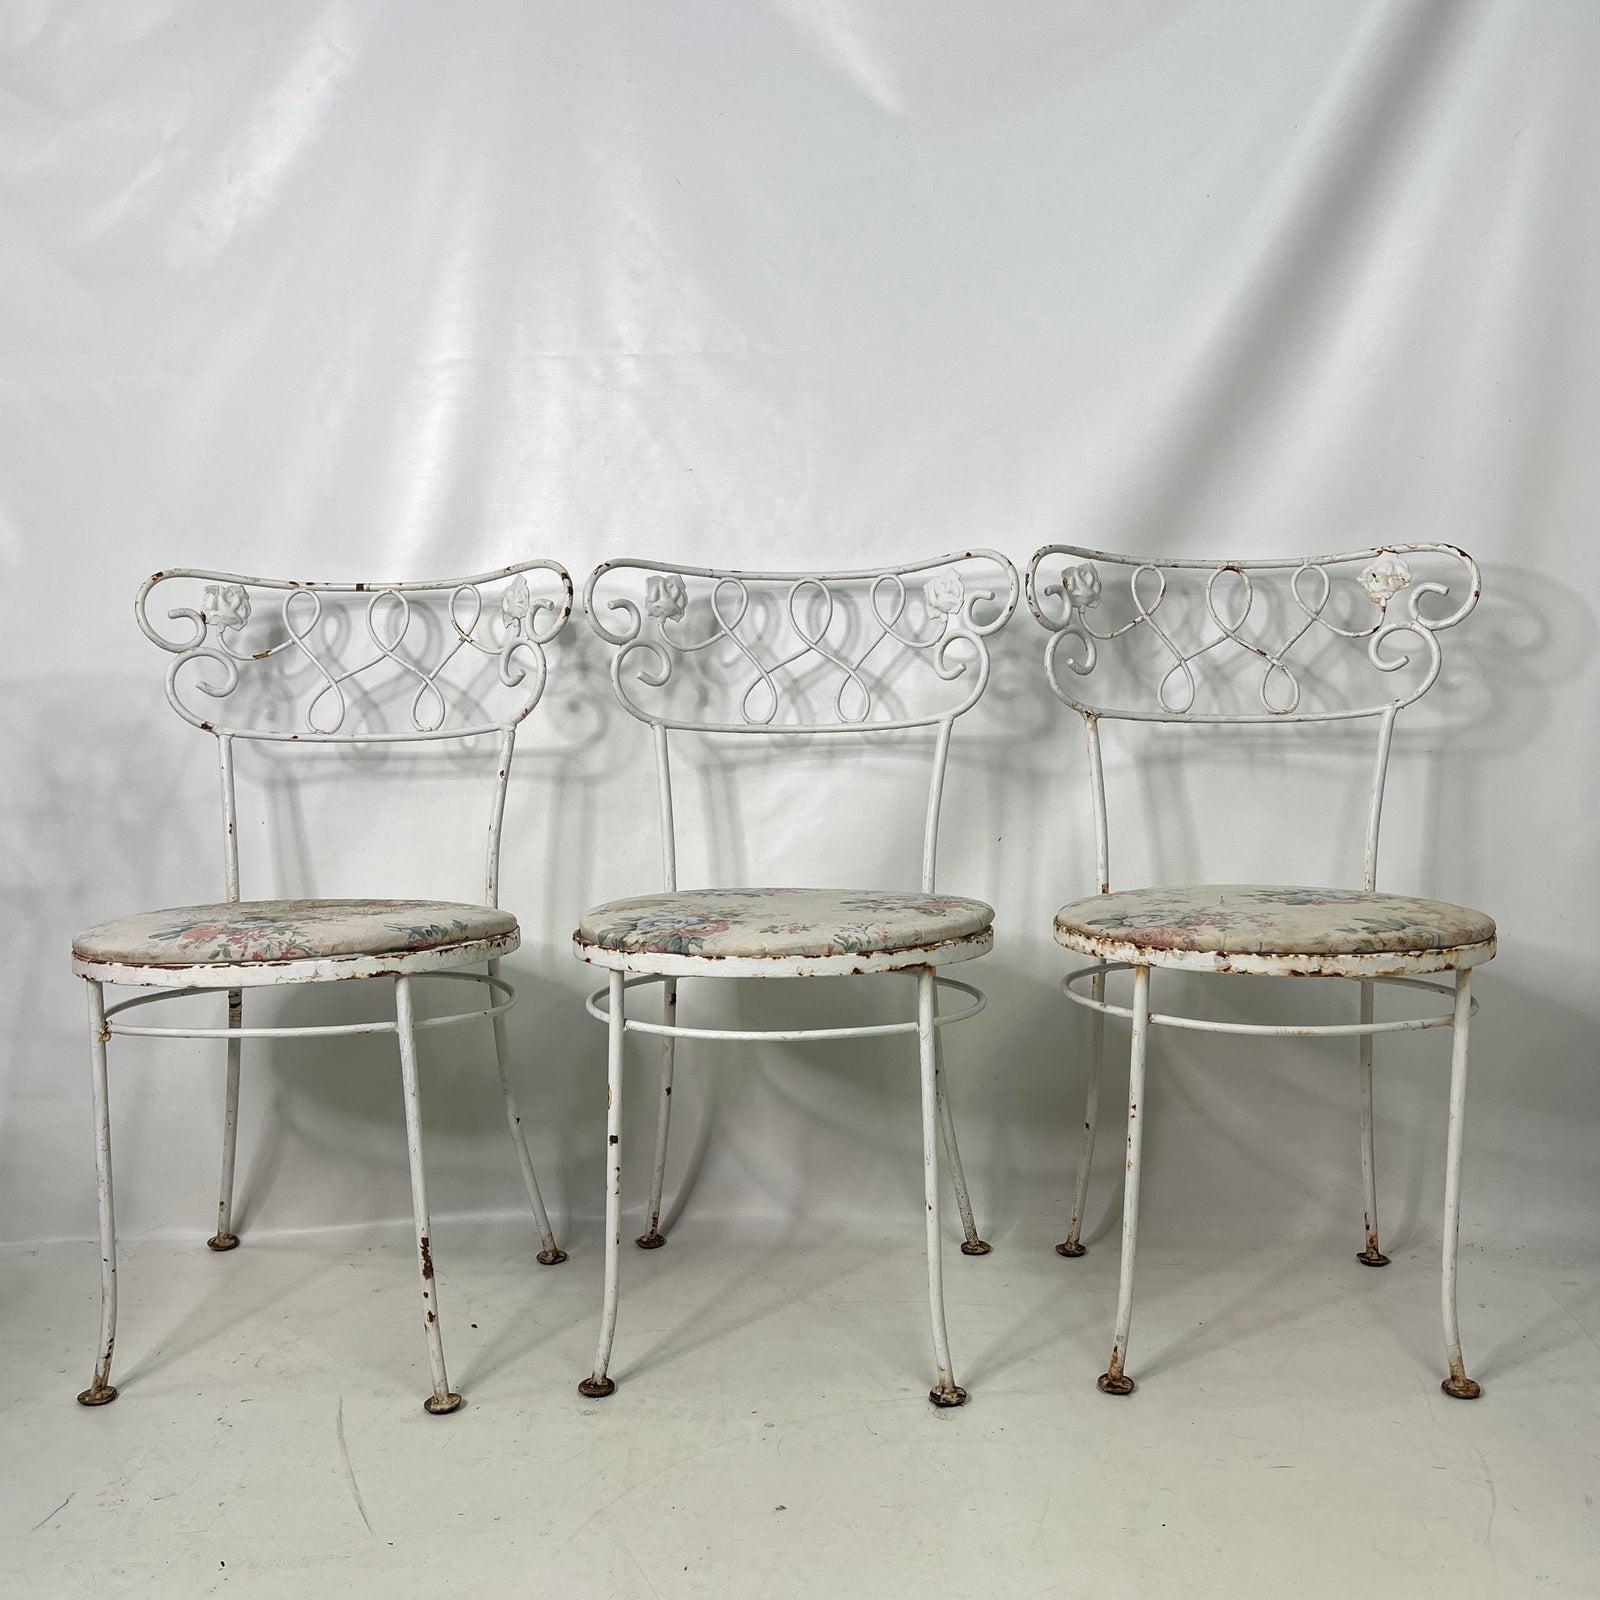 1960s Cast Iron Outdoor Chairs - Set of 4 For Sale 2